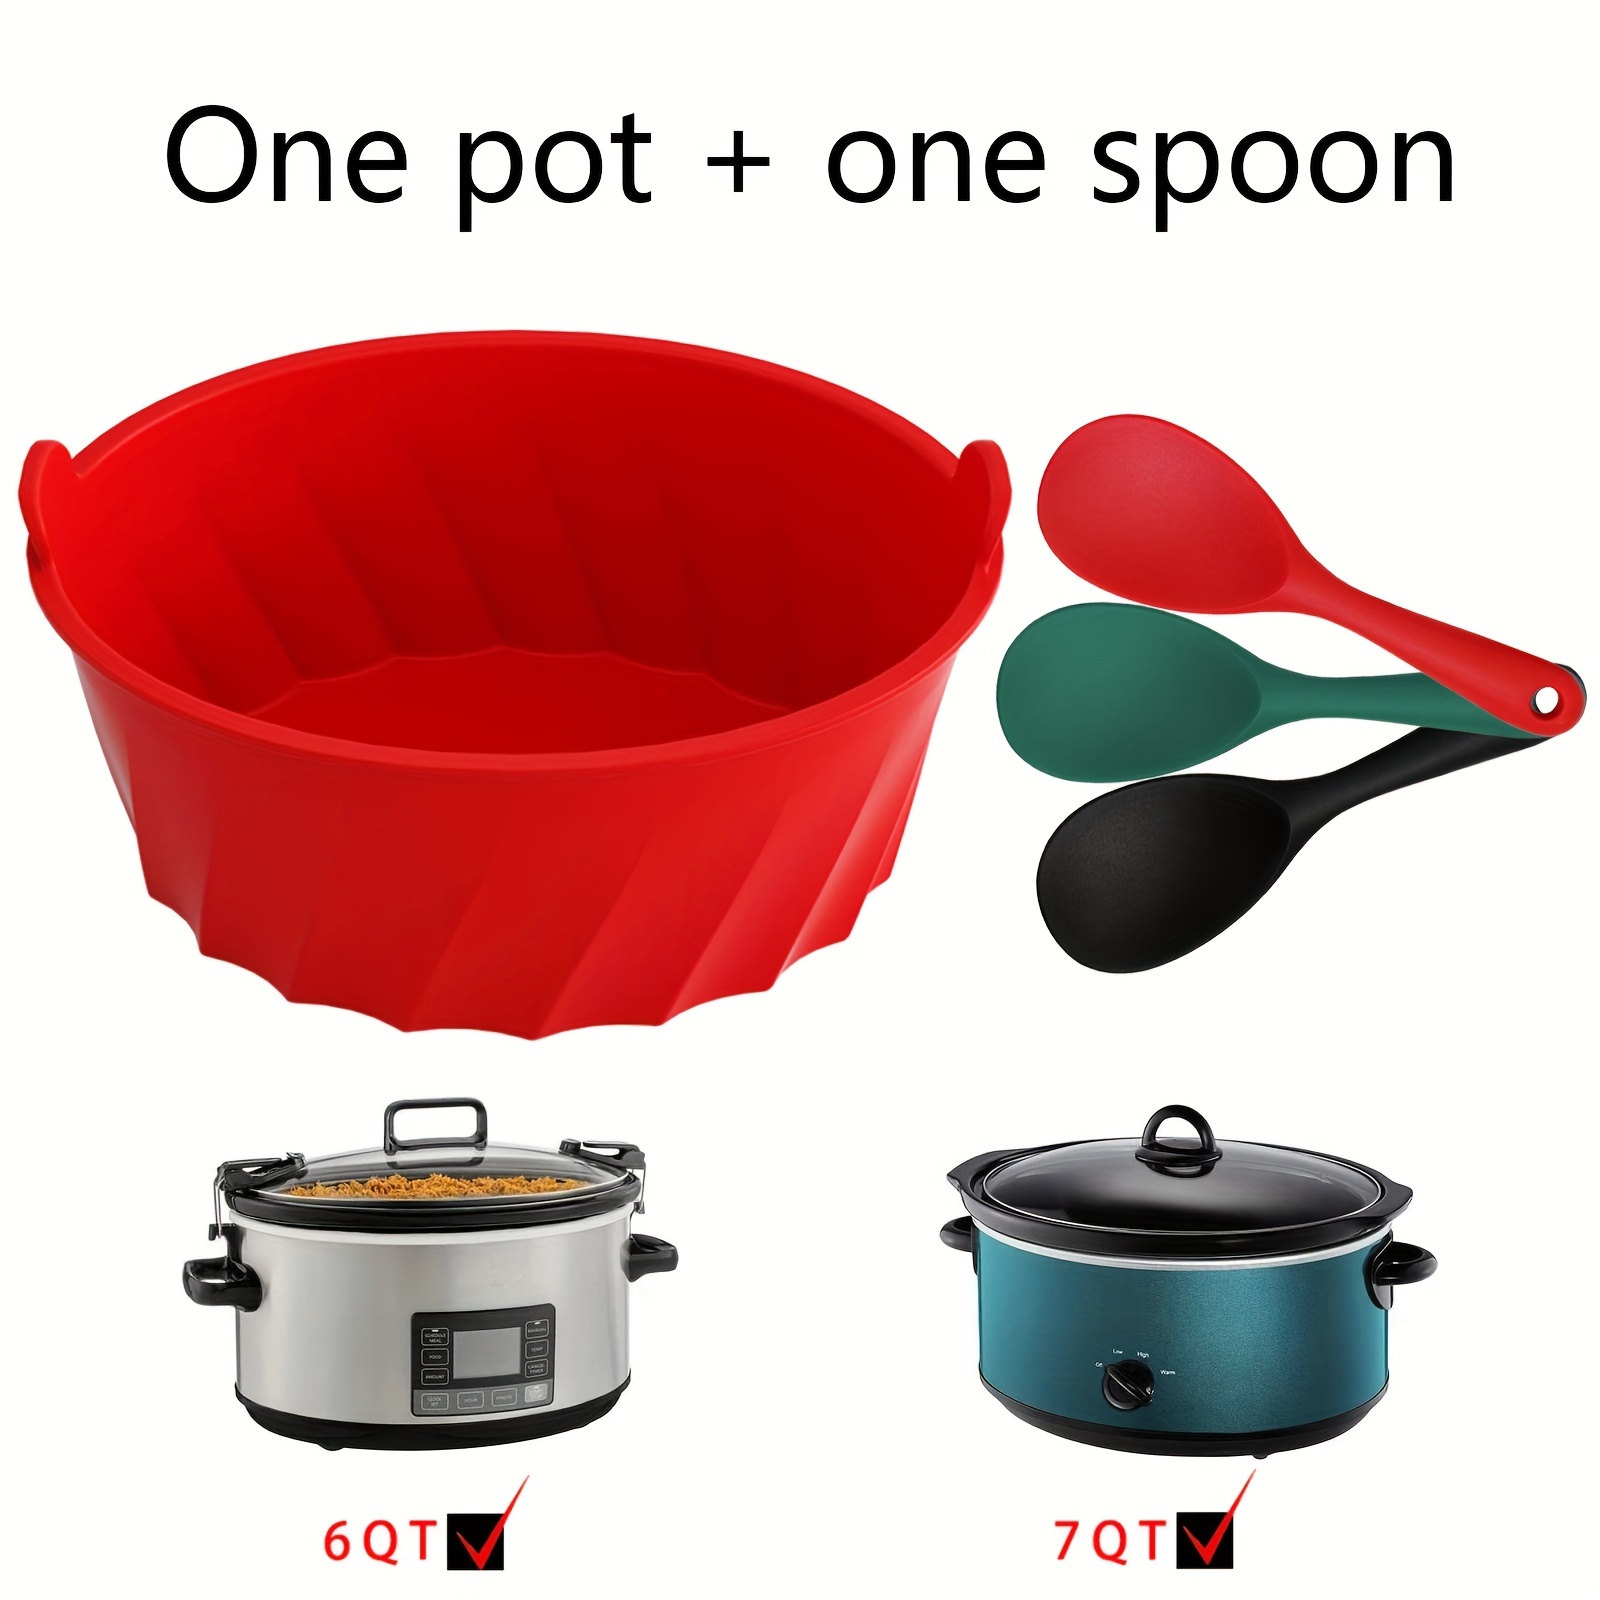 5pcs, Slow Cooker Liners, Kitchen Disposable Cooking Bags, BPA Free, For  Oval Or Round Pot, Size 13*21 Inches, Fit 3QT To 8QT